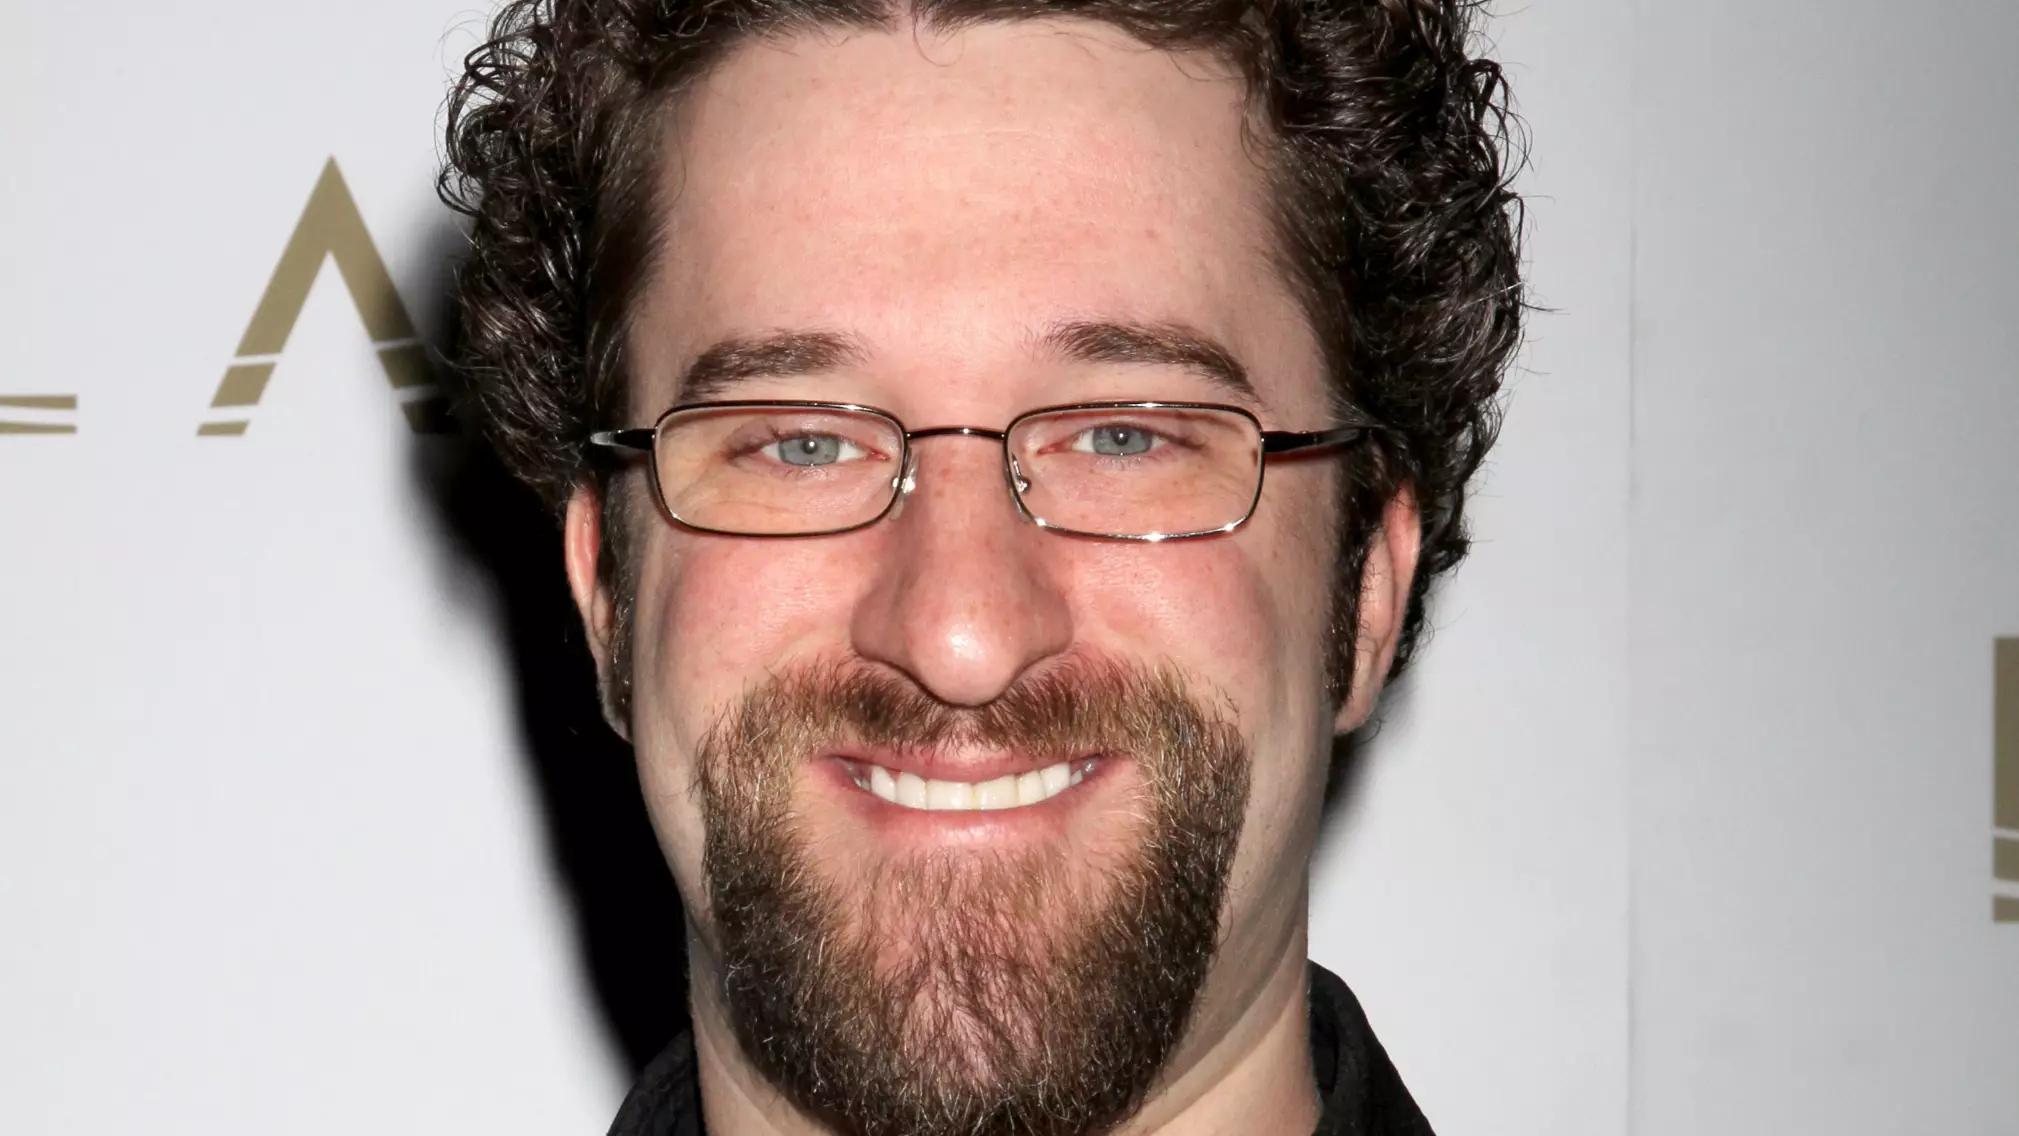 Saved By The Bell Star Dustin Diamond Has Died Aged 44